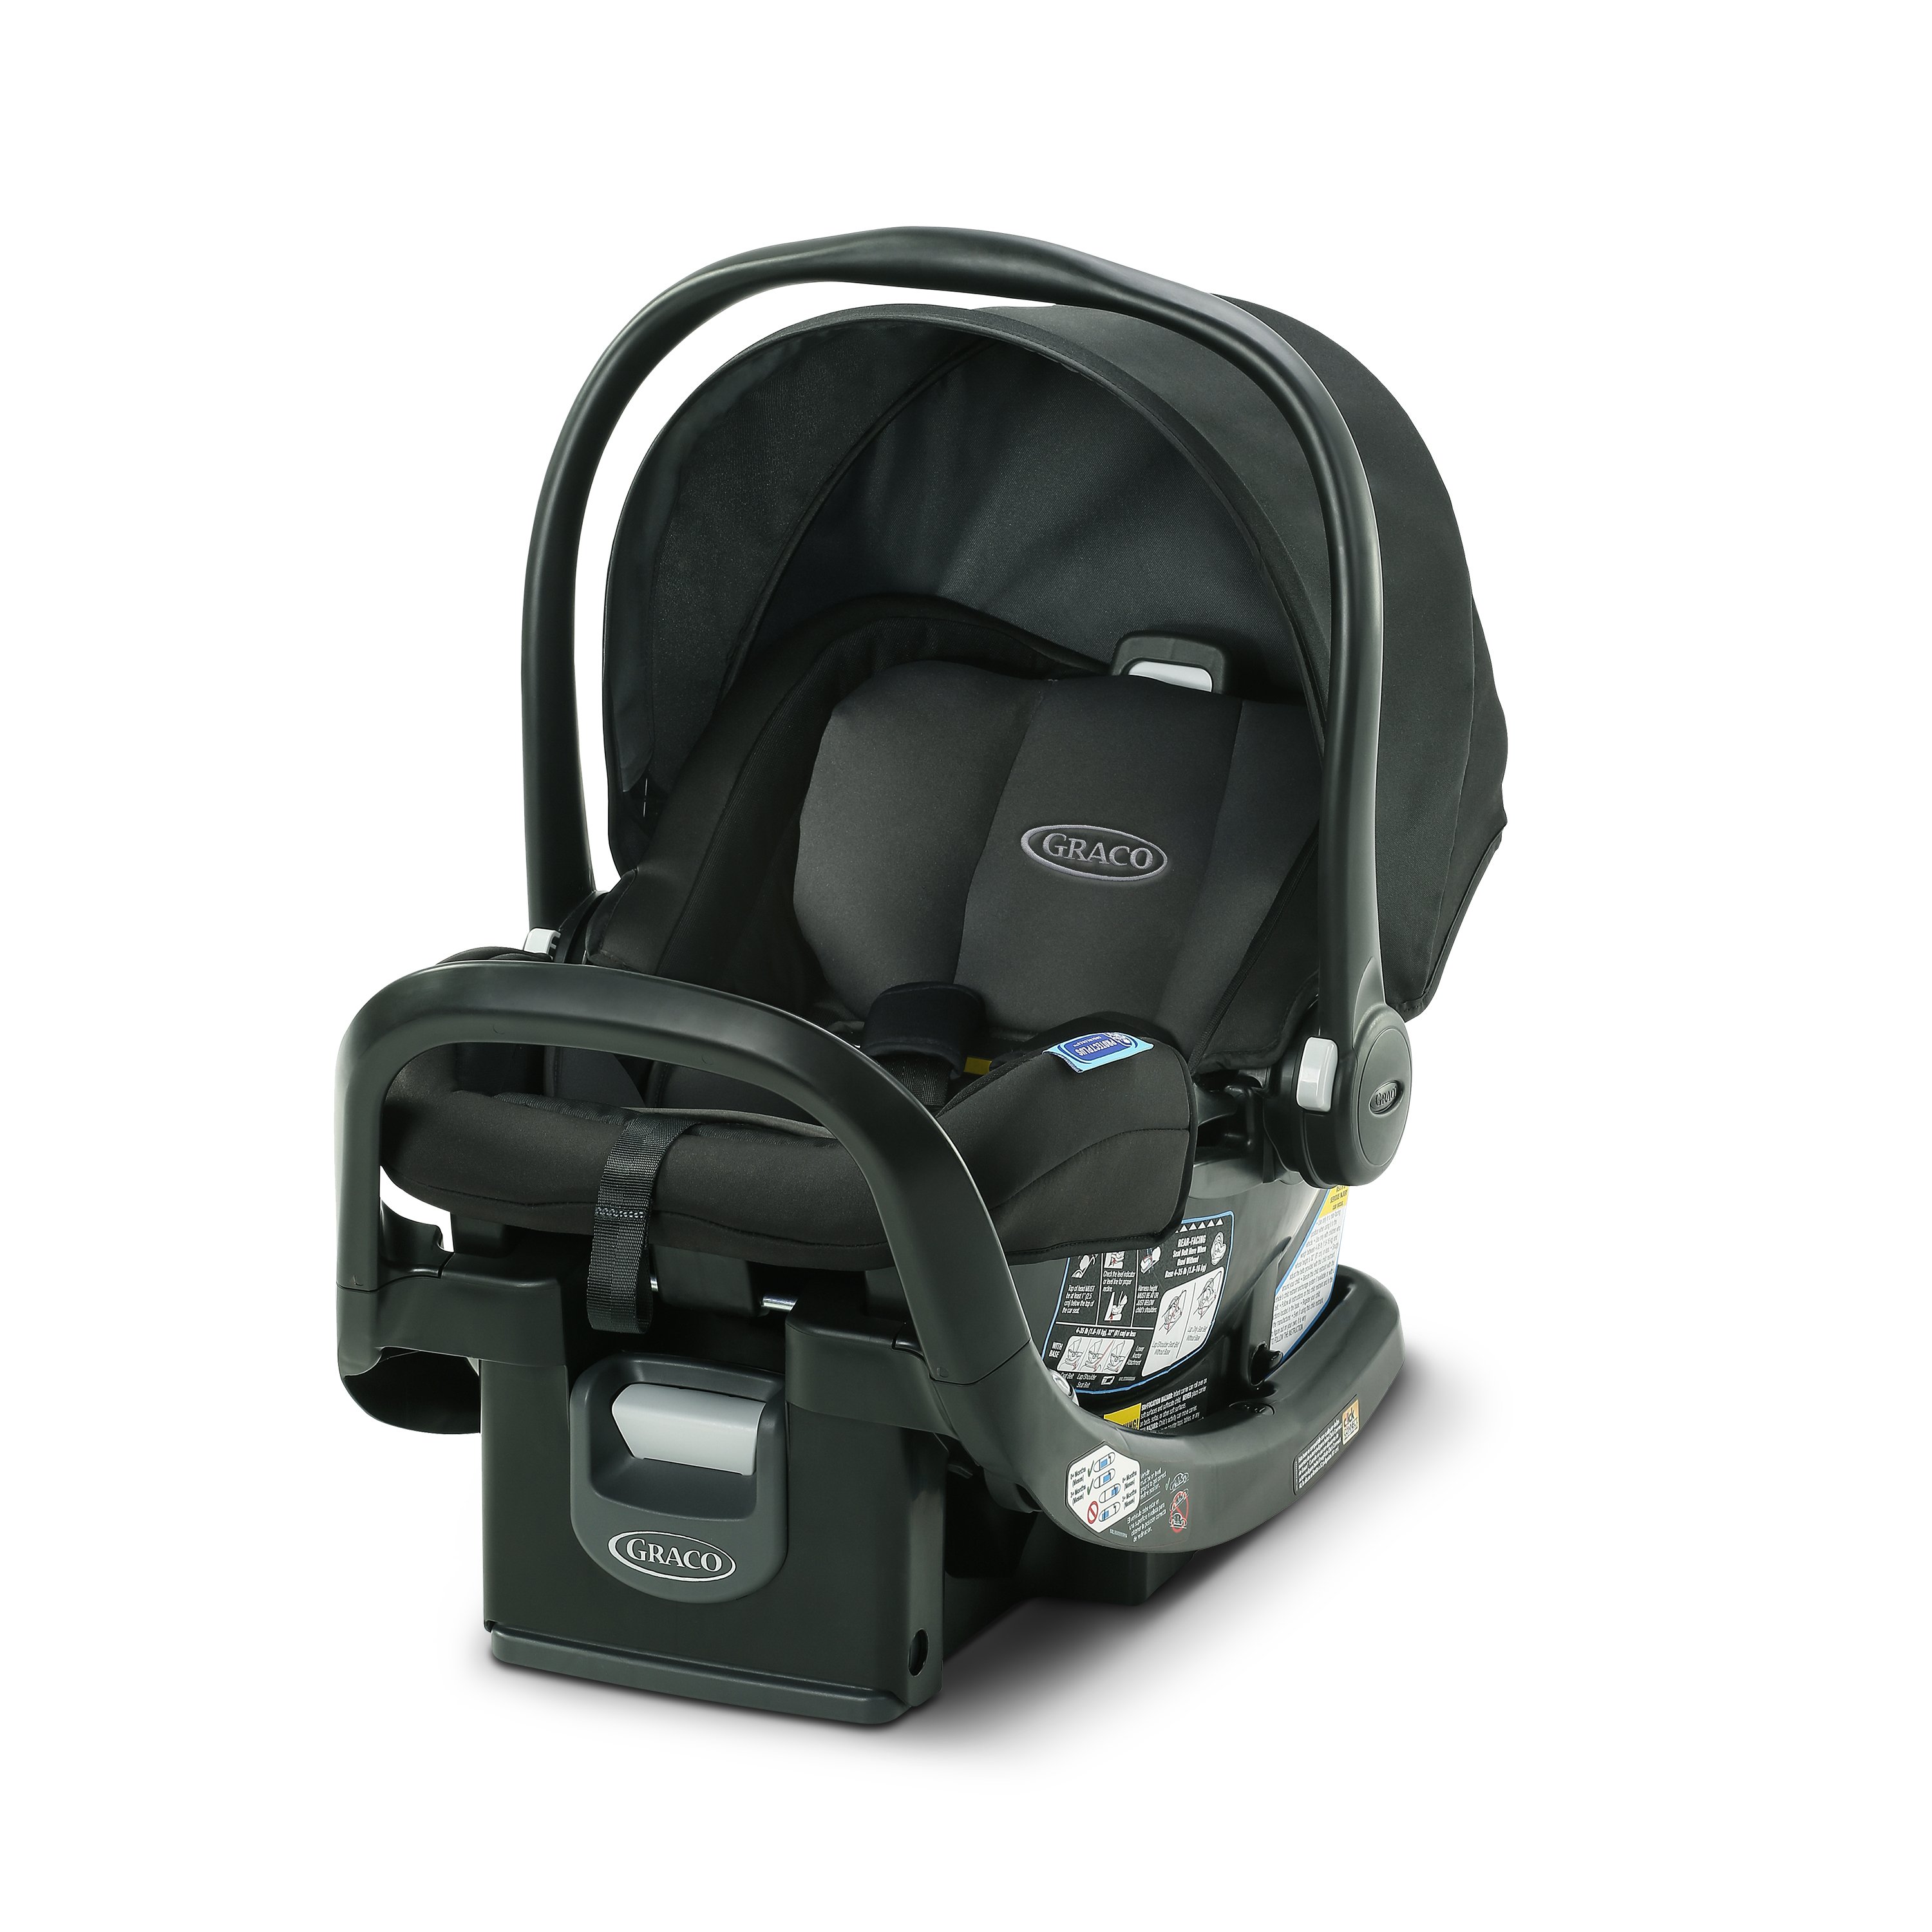 Graco Infant Car Seat Insert: The Ultimate Safety Upgrade